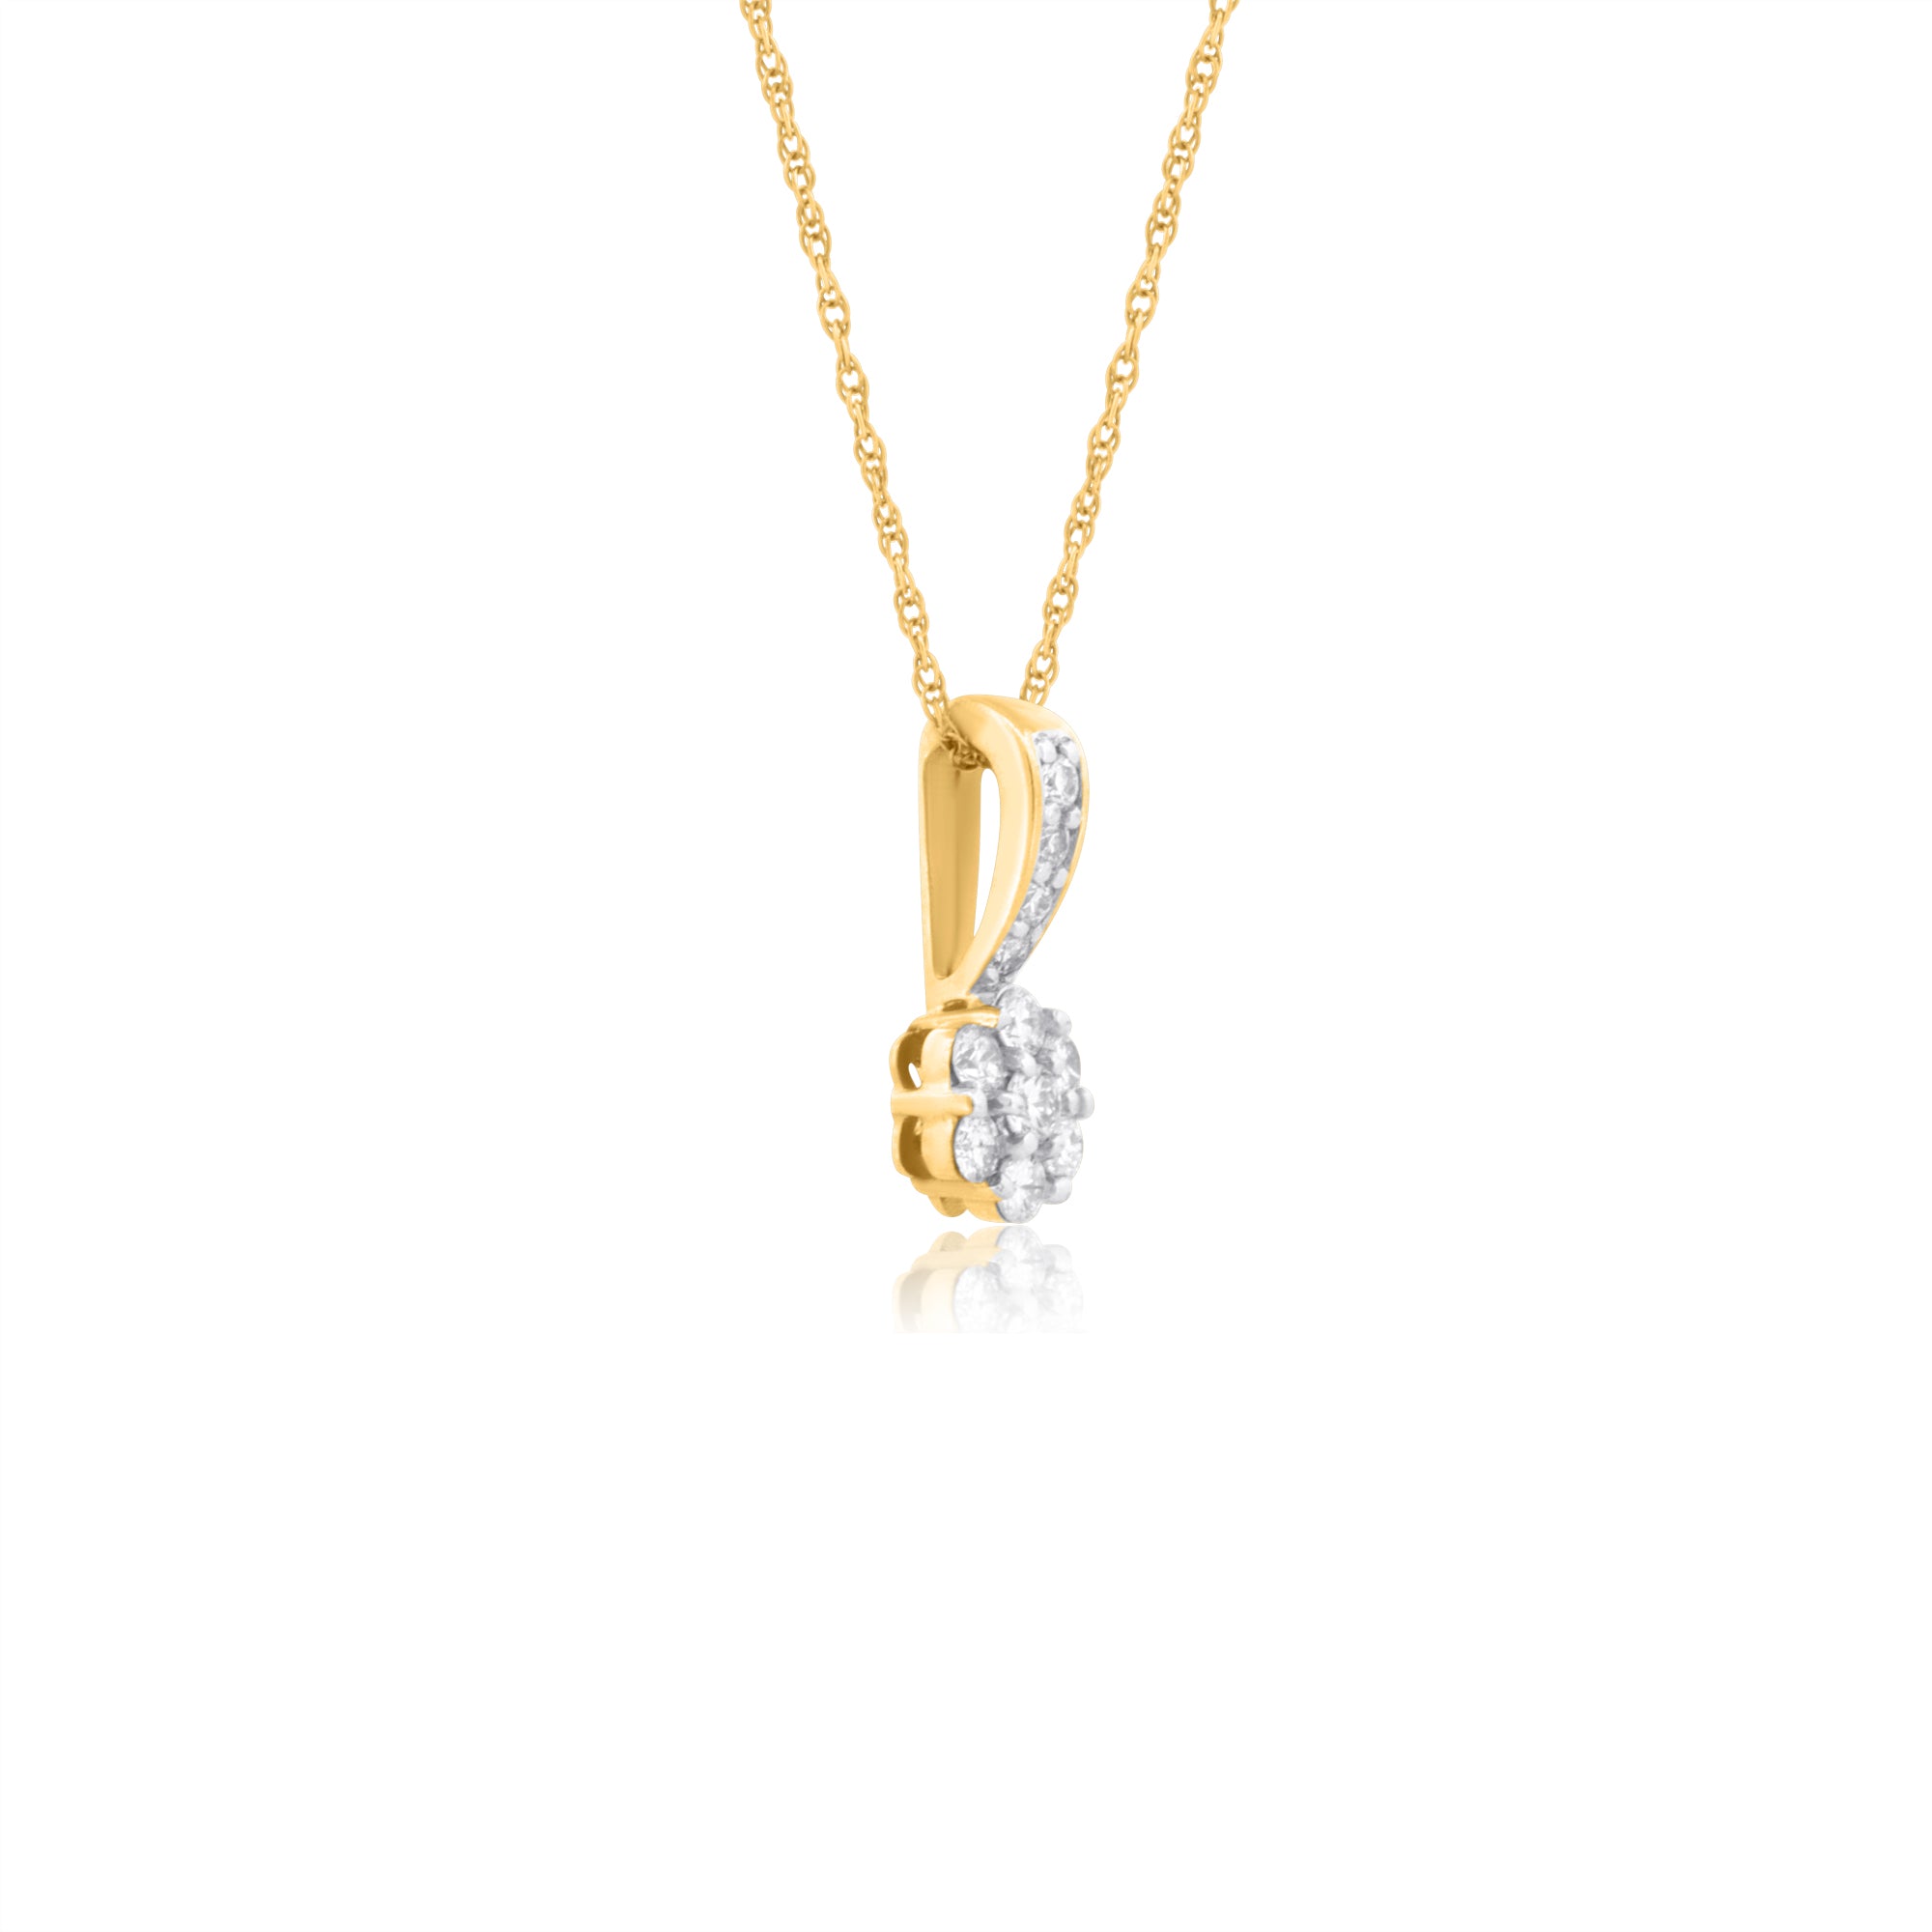 10k Yellow Gold with .25Ctw White Diamond Petite Flower Necklace